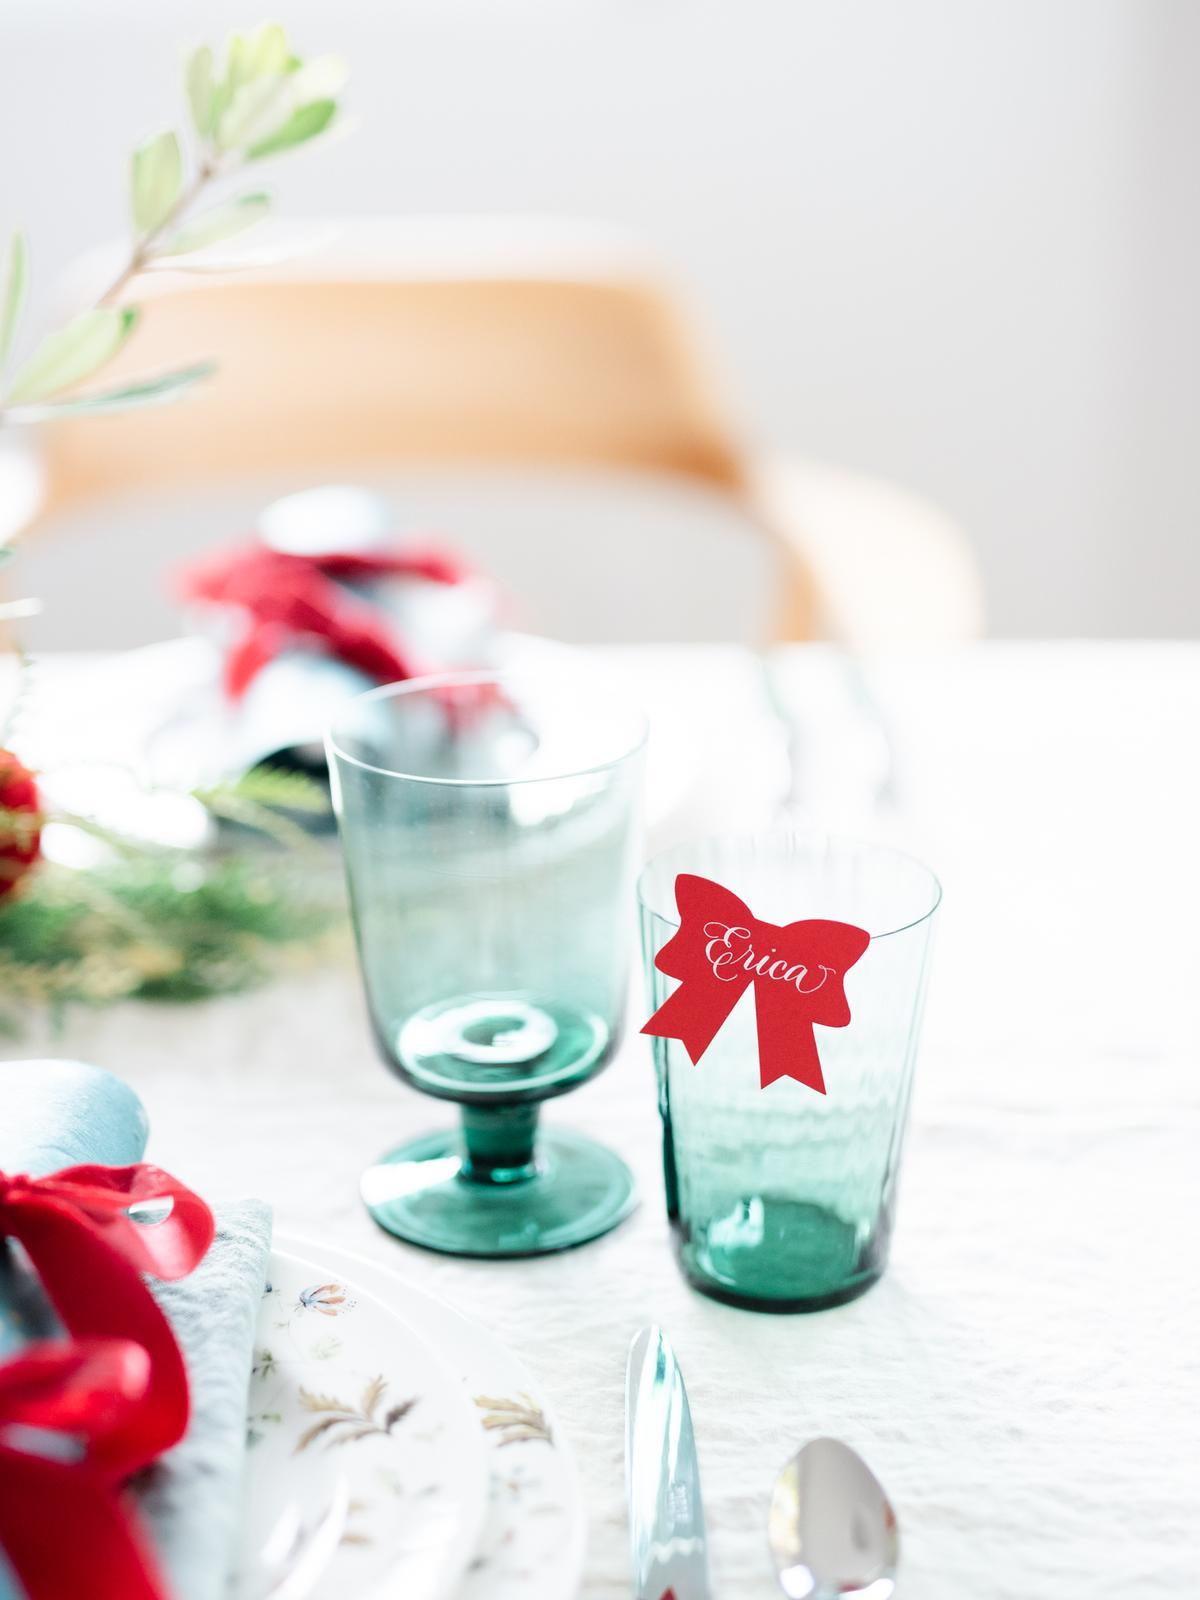 Hydrate Through the Holidays With Drinkware That’s Festive in More Ways Than One